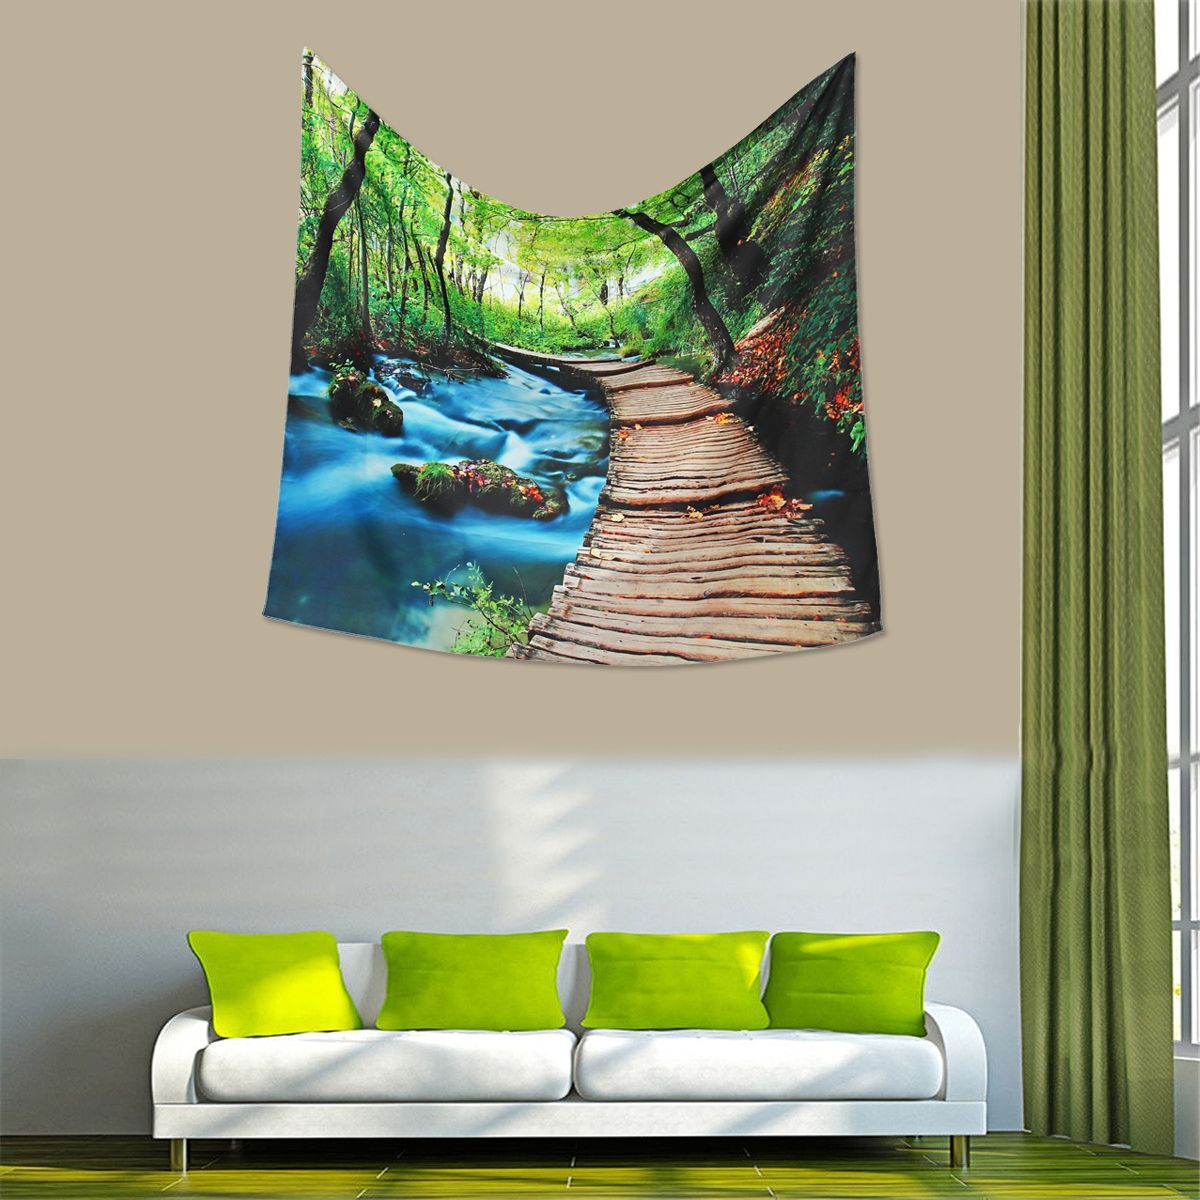 Forest-Art-Tapestry-Wall-Hanging-Throw-Bedspread-Beach-Towel-Cloth-Home-Decor-1540260